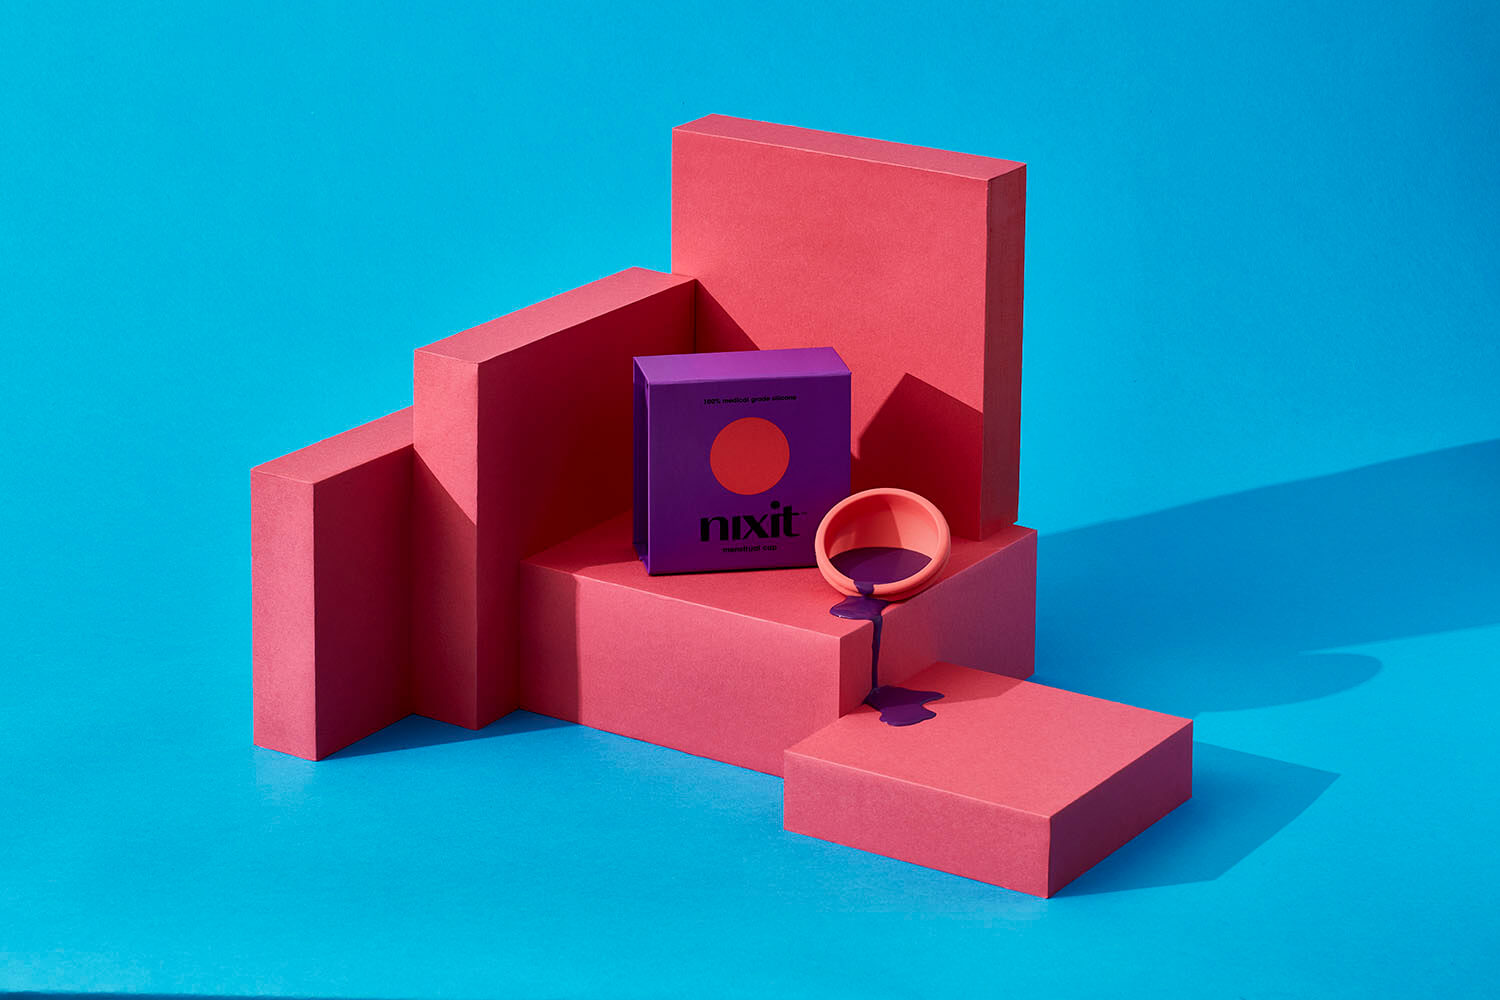 How a Nixit Menstrual Cup Can Help With Heavy Periods